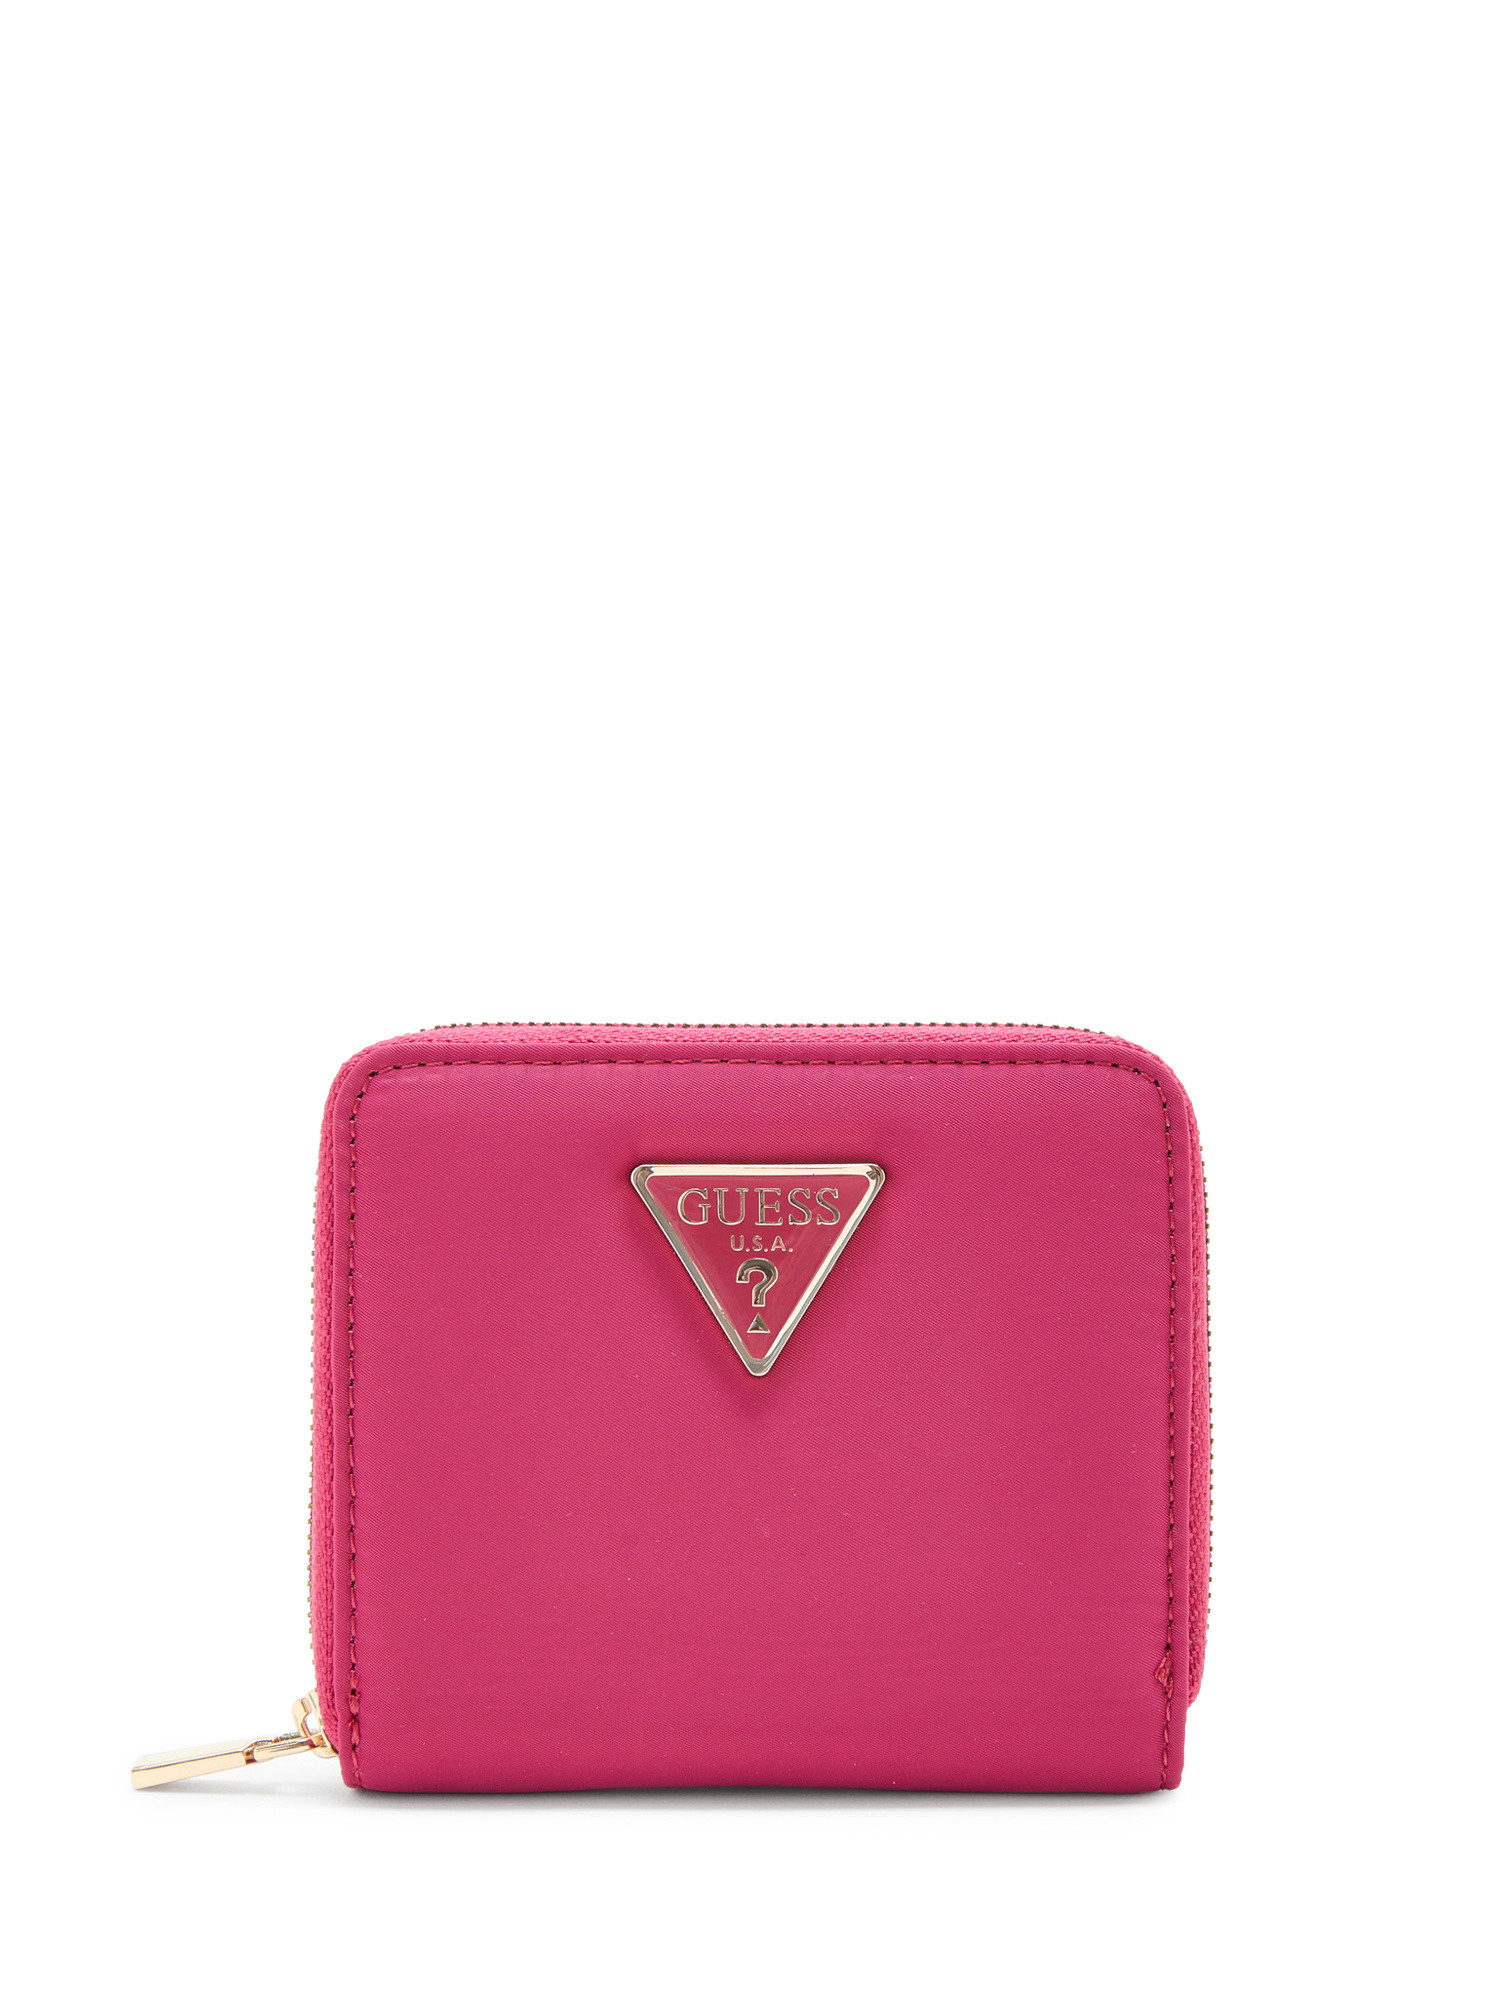 Guess - Gemma eco mini wallet, Red, large image number 0